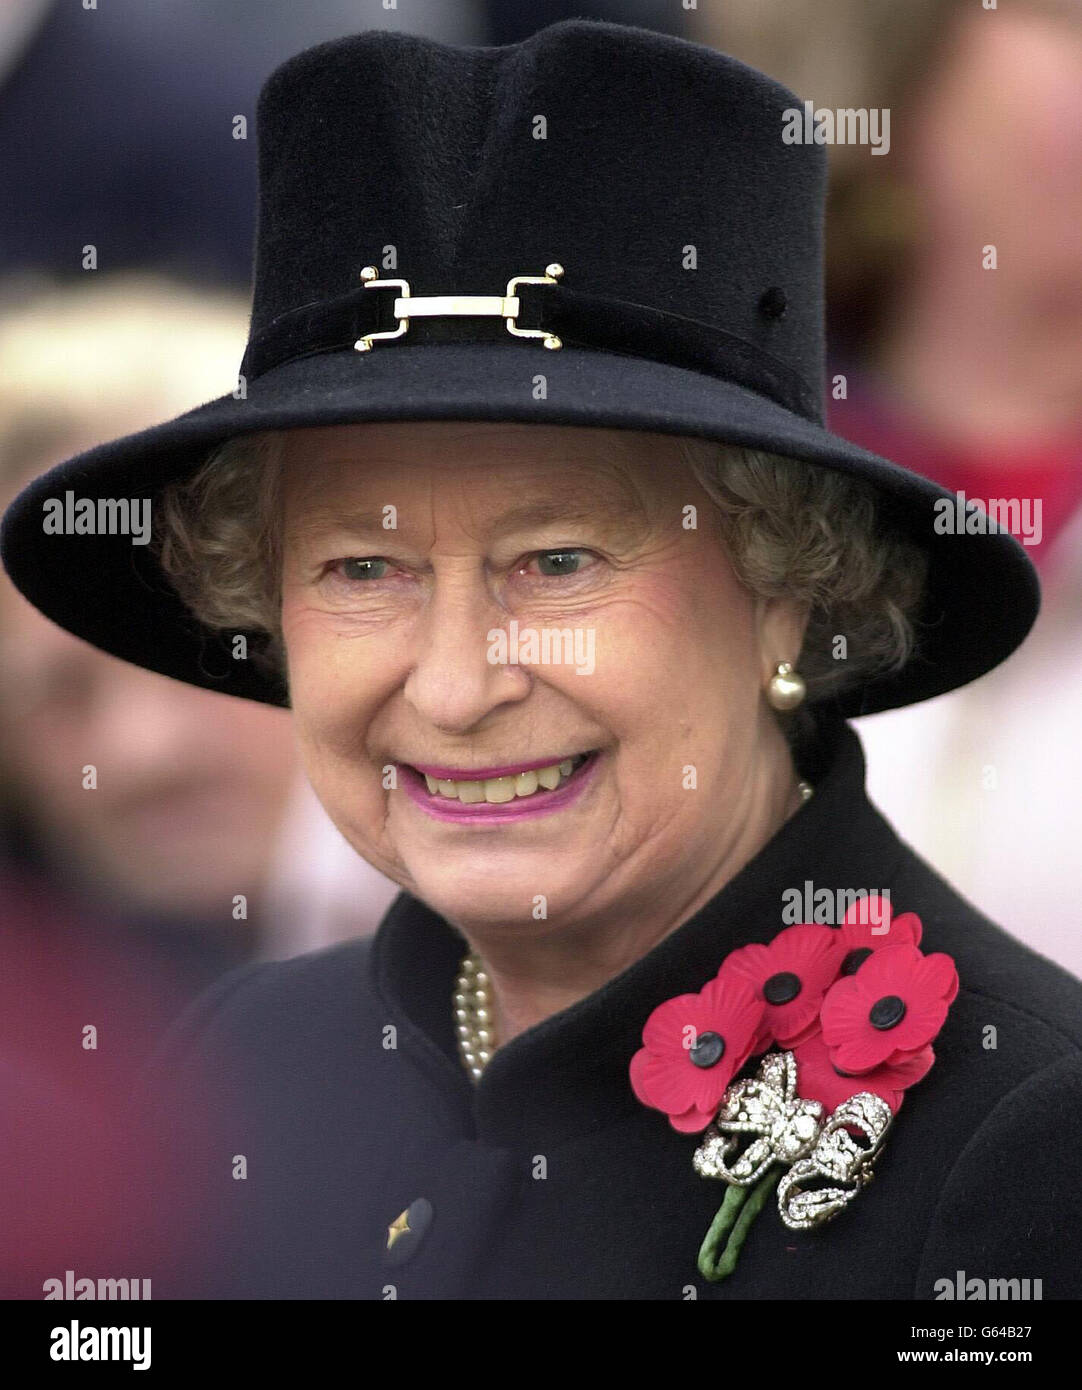 Britain's Queen Elizabeth II attends the Field of Remembrance Service at Westminster Abbey. * The Queen opened the ceremony - the annual open air service in St Margaret's churchyard, held in memory of Britain's war heroes - by laying down a small wooden cross bearing a scarlet poppy in the field. Stock Photo